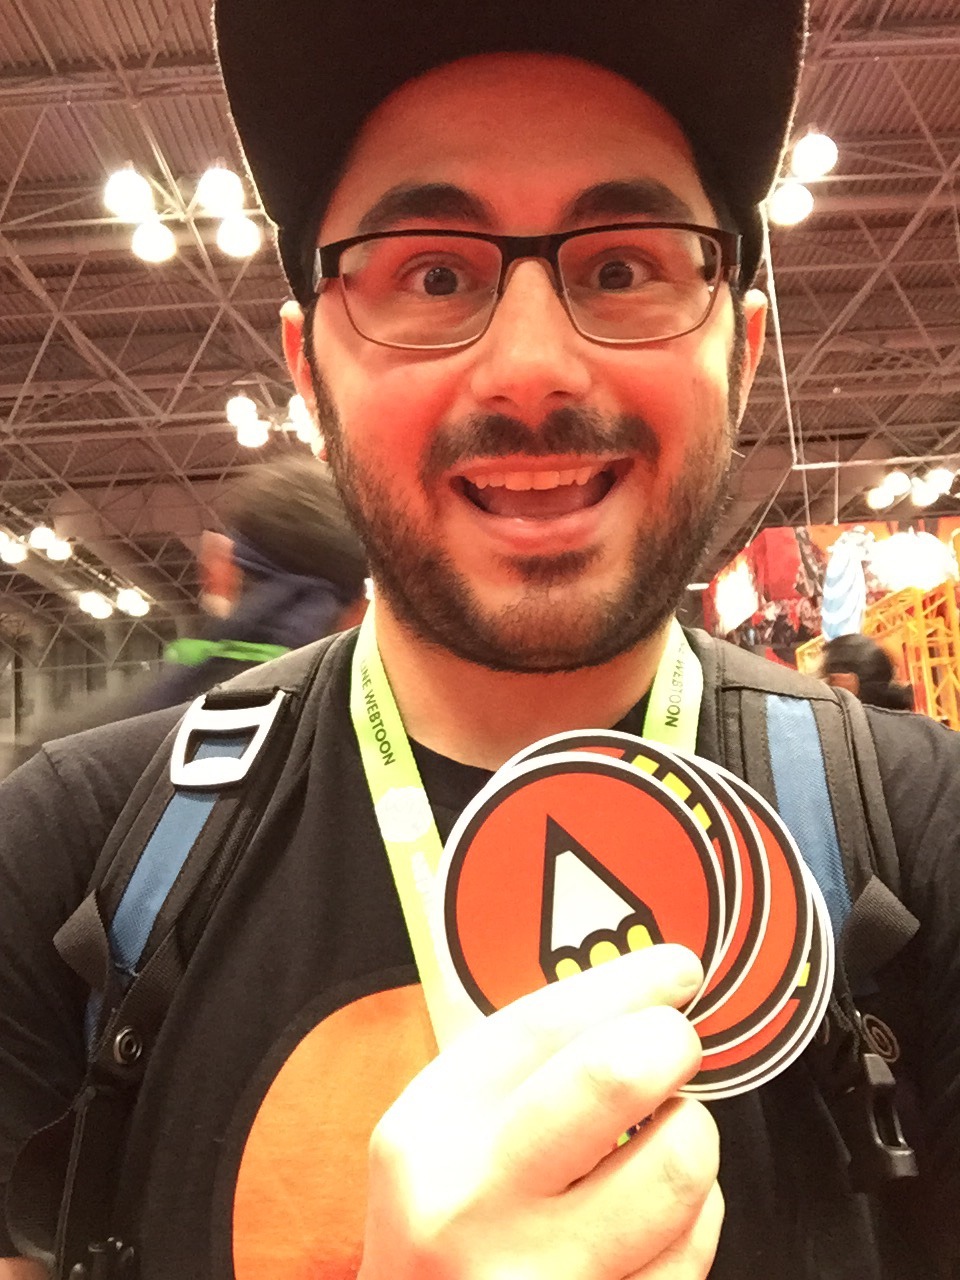 If you&rsquo;re at the New York Comic Con today and you spot me in the EatSleepDraw t-shirt, don&rsquo;t be shy! I&rsquo;ll hand you an EatSleepDraw sticker!